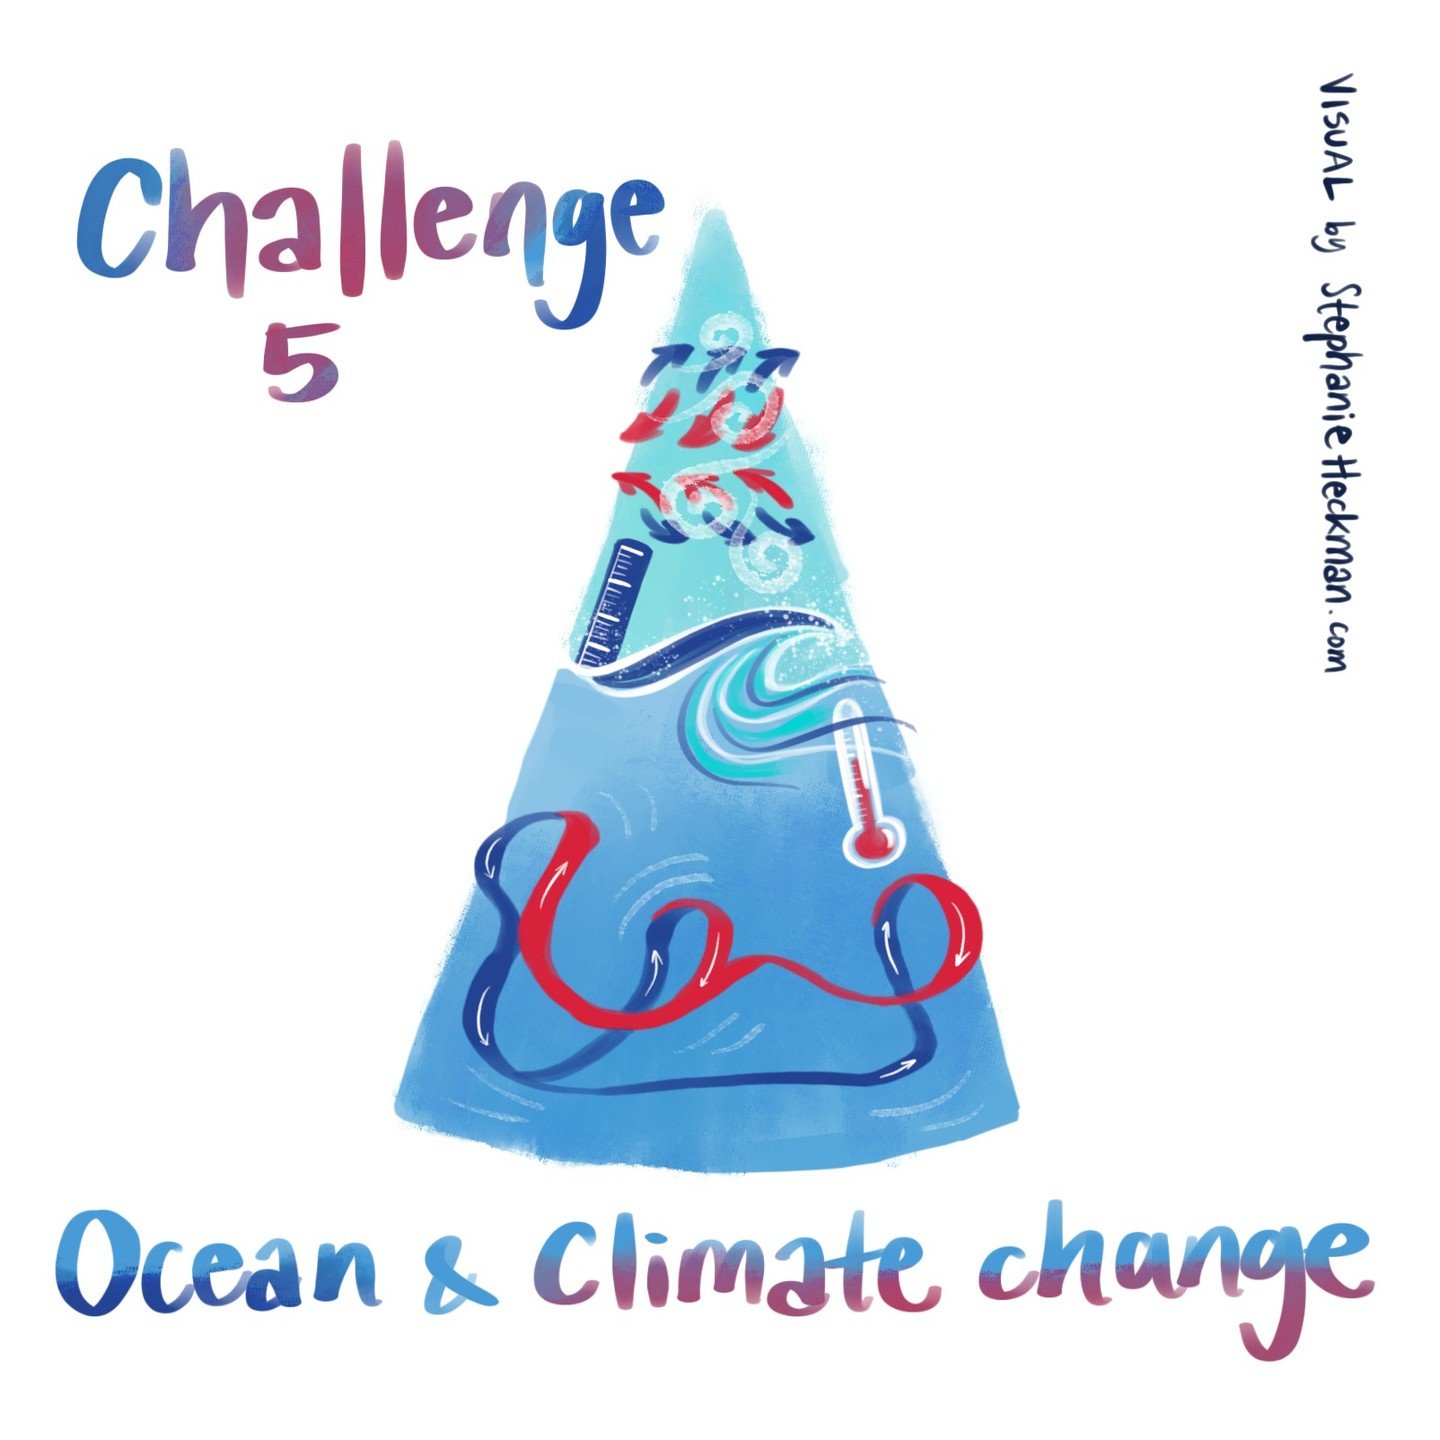 UN Ocean Decade challenge 5: Ocean &amp; climate change

The Ocean is our greatest ally in combating climate change, but today it suffers from fever (warming), breathlessness (hypoxia) and osteoporosis (acidification). We must help it get well so it 